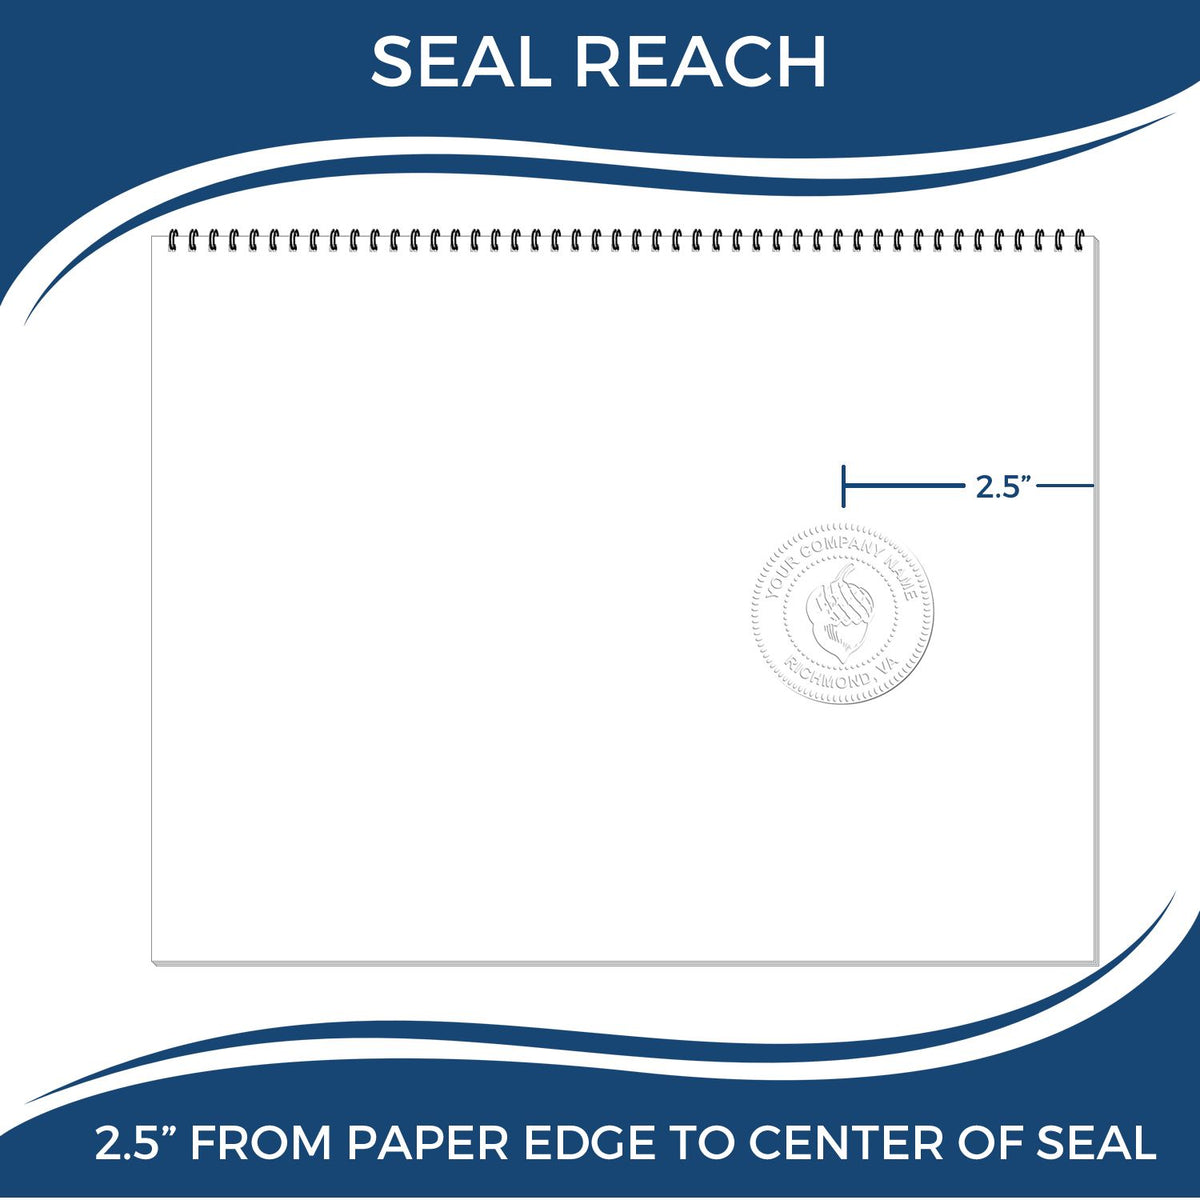 An infographic showing the seal reach which is represented by a ruler and a miniature seal image of the Heavy Duty Cast Iron Connecticut Architect Embosser